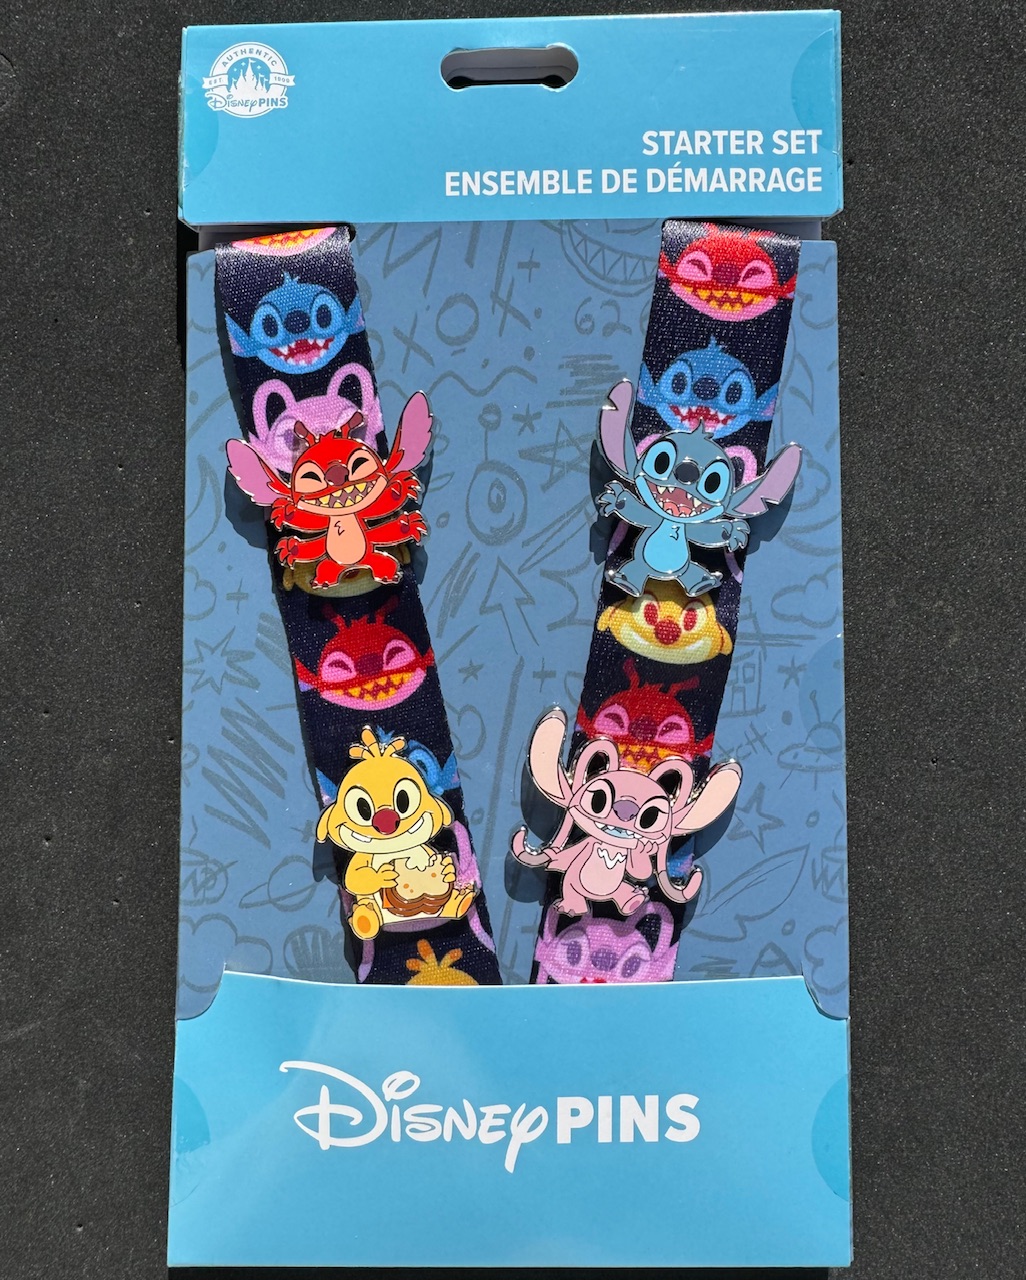 Lilo & Stitch: The Series Pin Trading Starter Set at Disney Parks